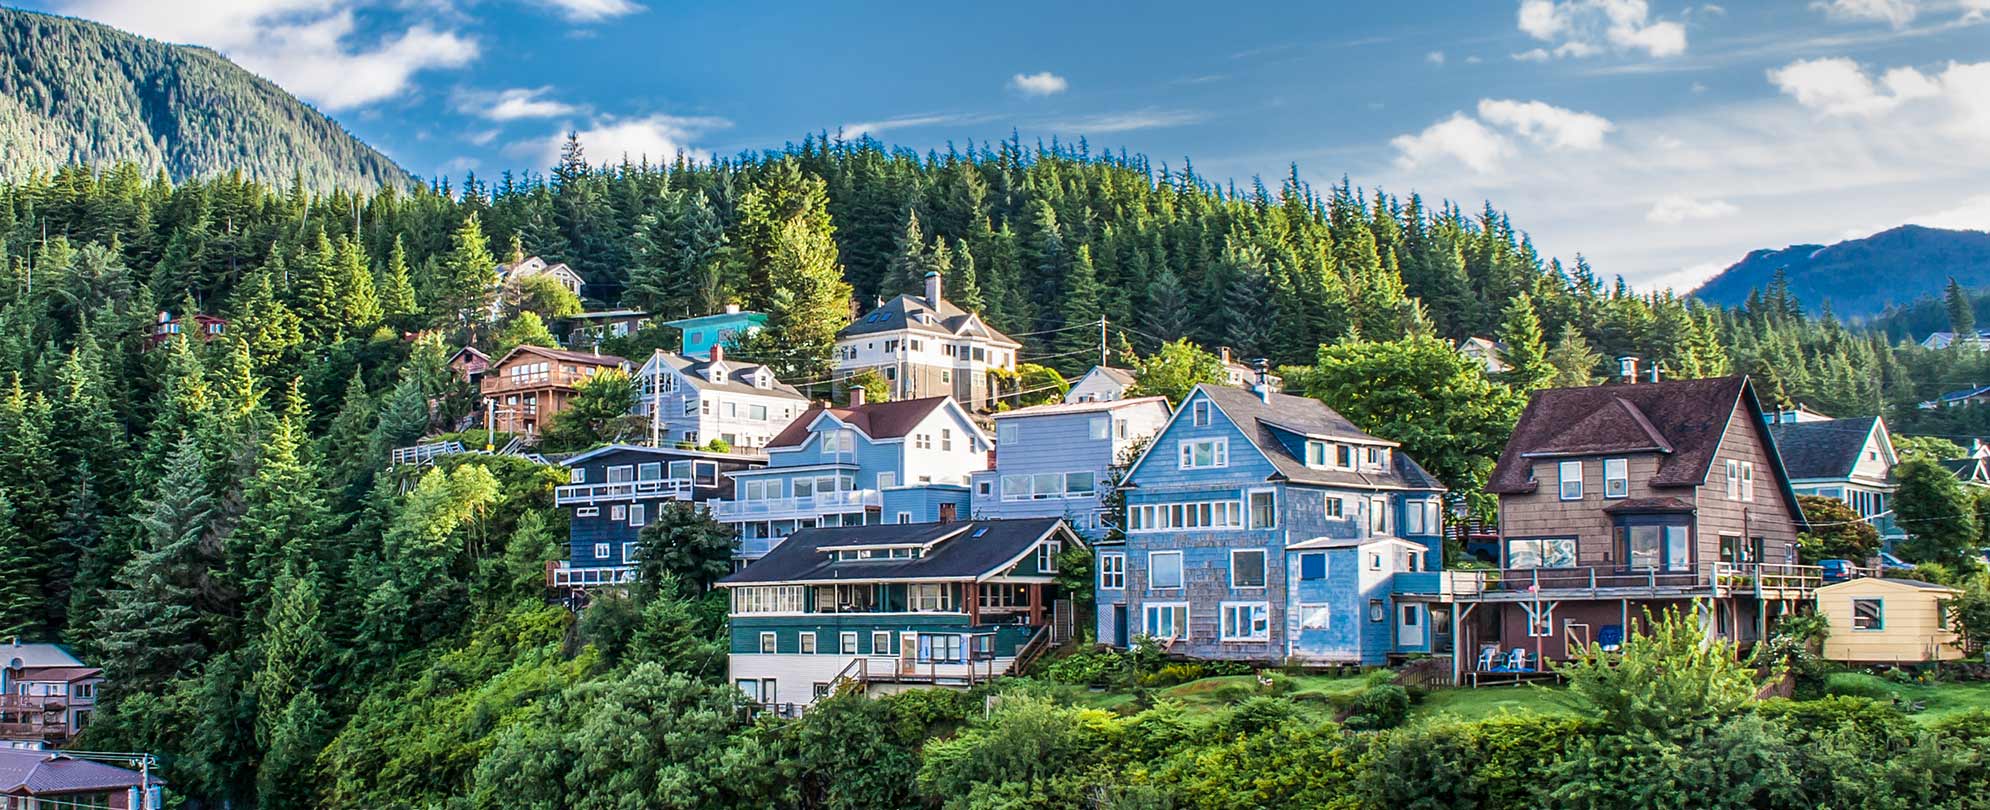 Multiple houses on a hill surrounded by pine trees and mountains in Ketchikan, Alaska.